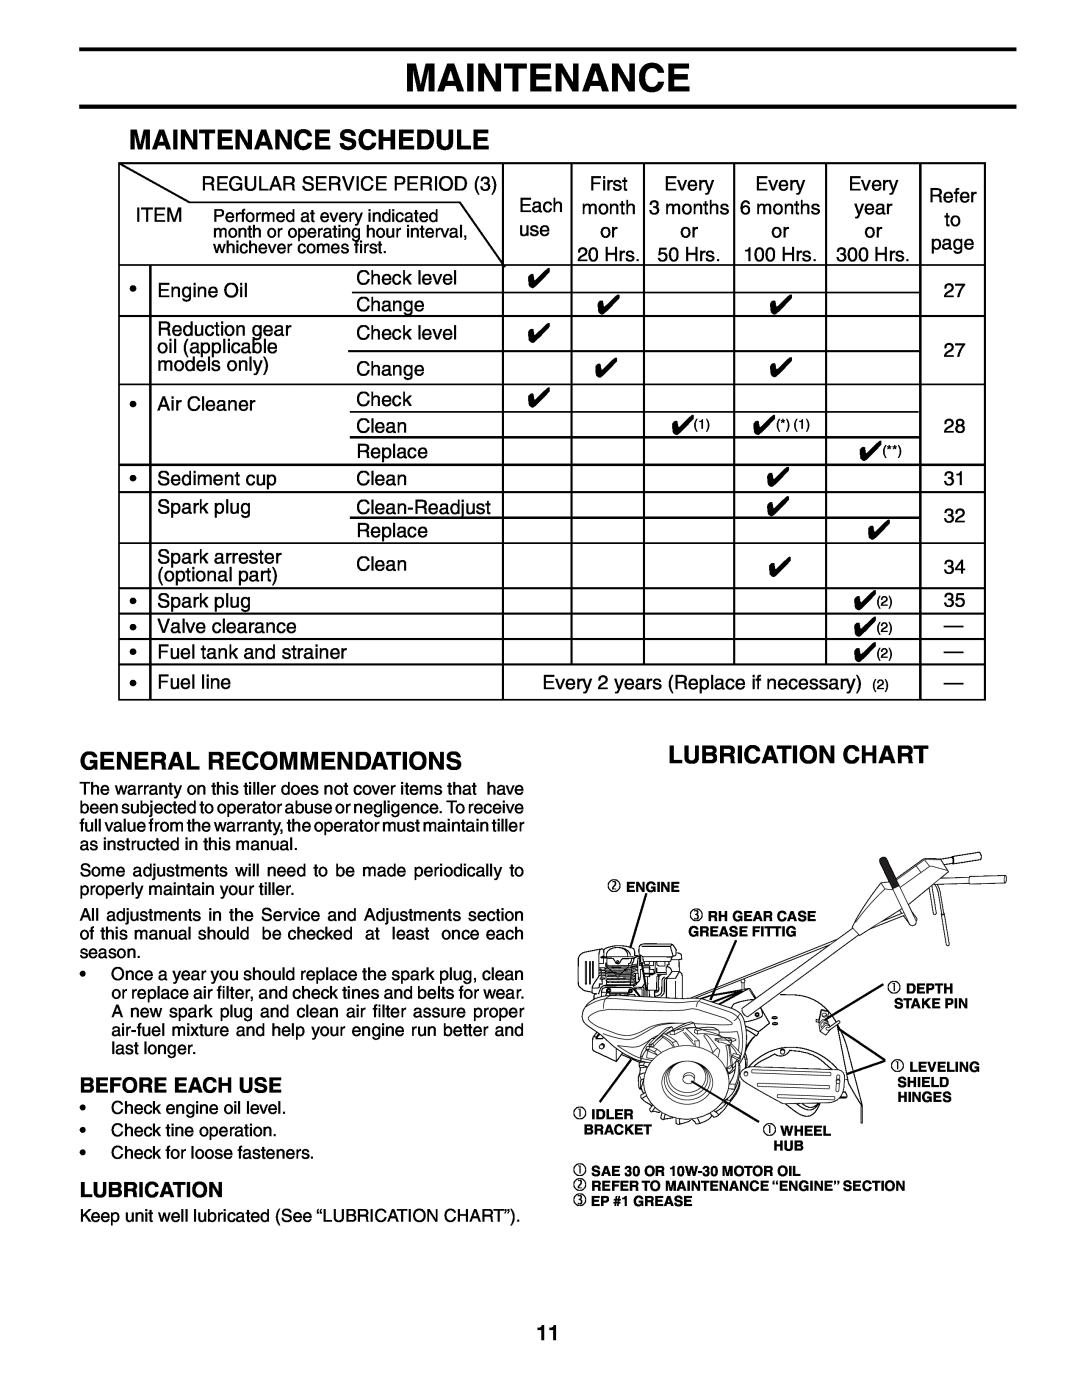 Husqvarna 500RTTA owner manual General Recommendations, Lubrication Chart, Before Each Use, Maintenance Schedule 